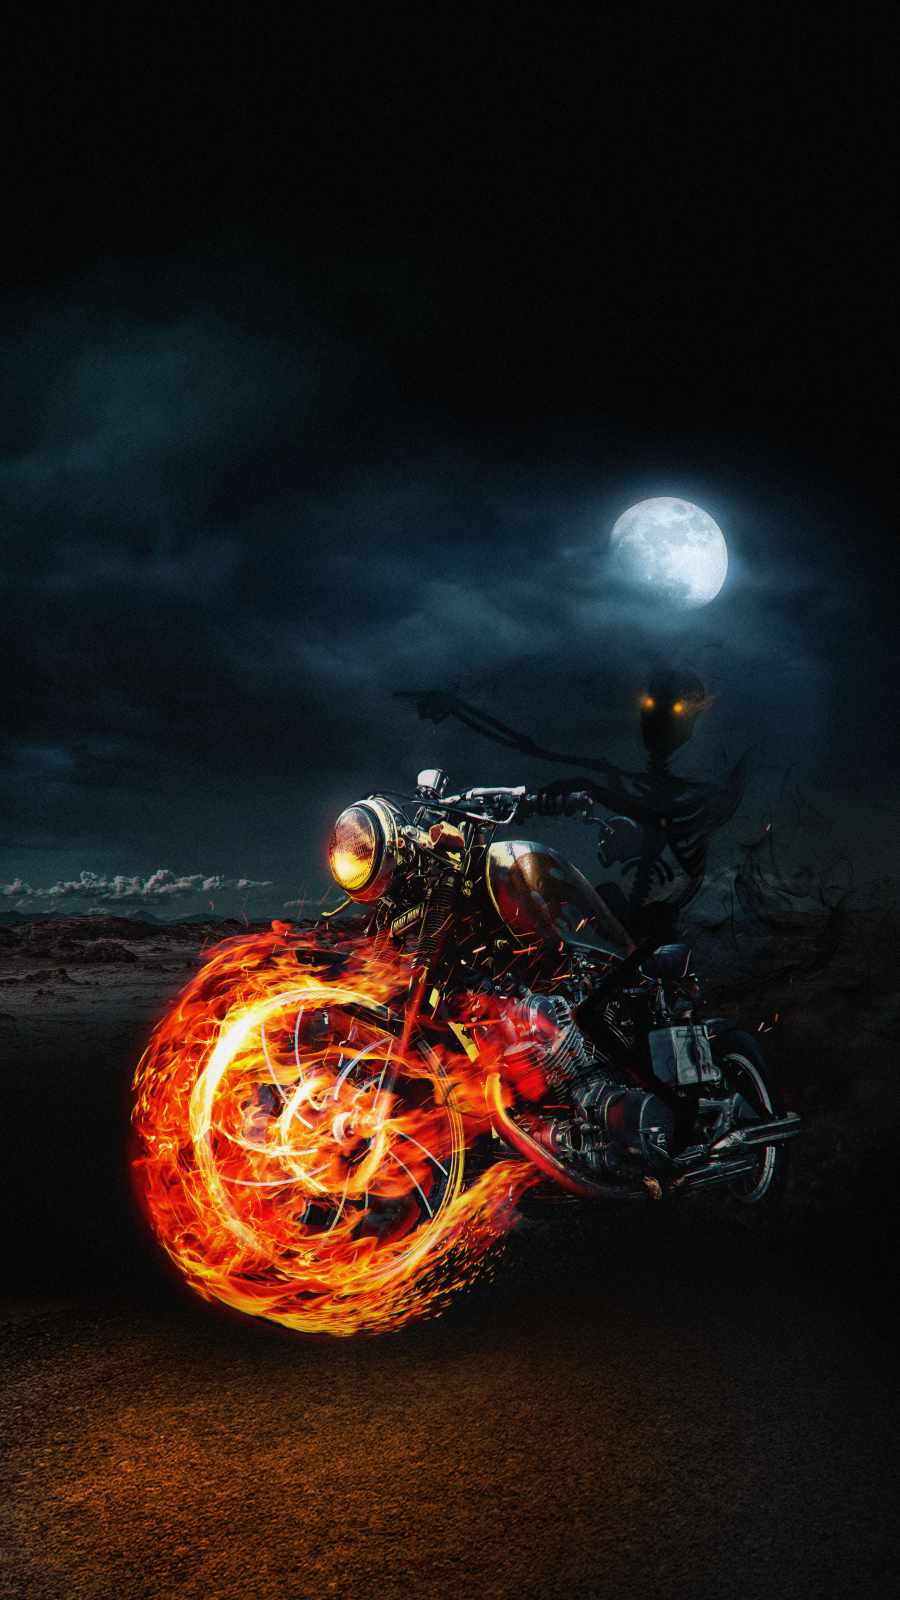 Ghost Rider Motorcycle - IPhone Wallpapers : iPhone Wallpapers